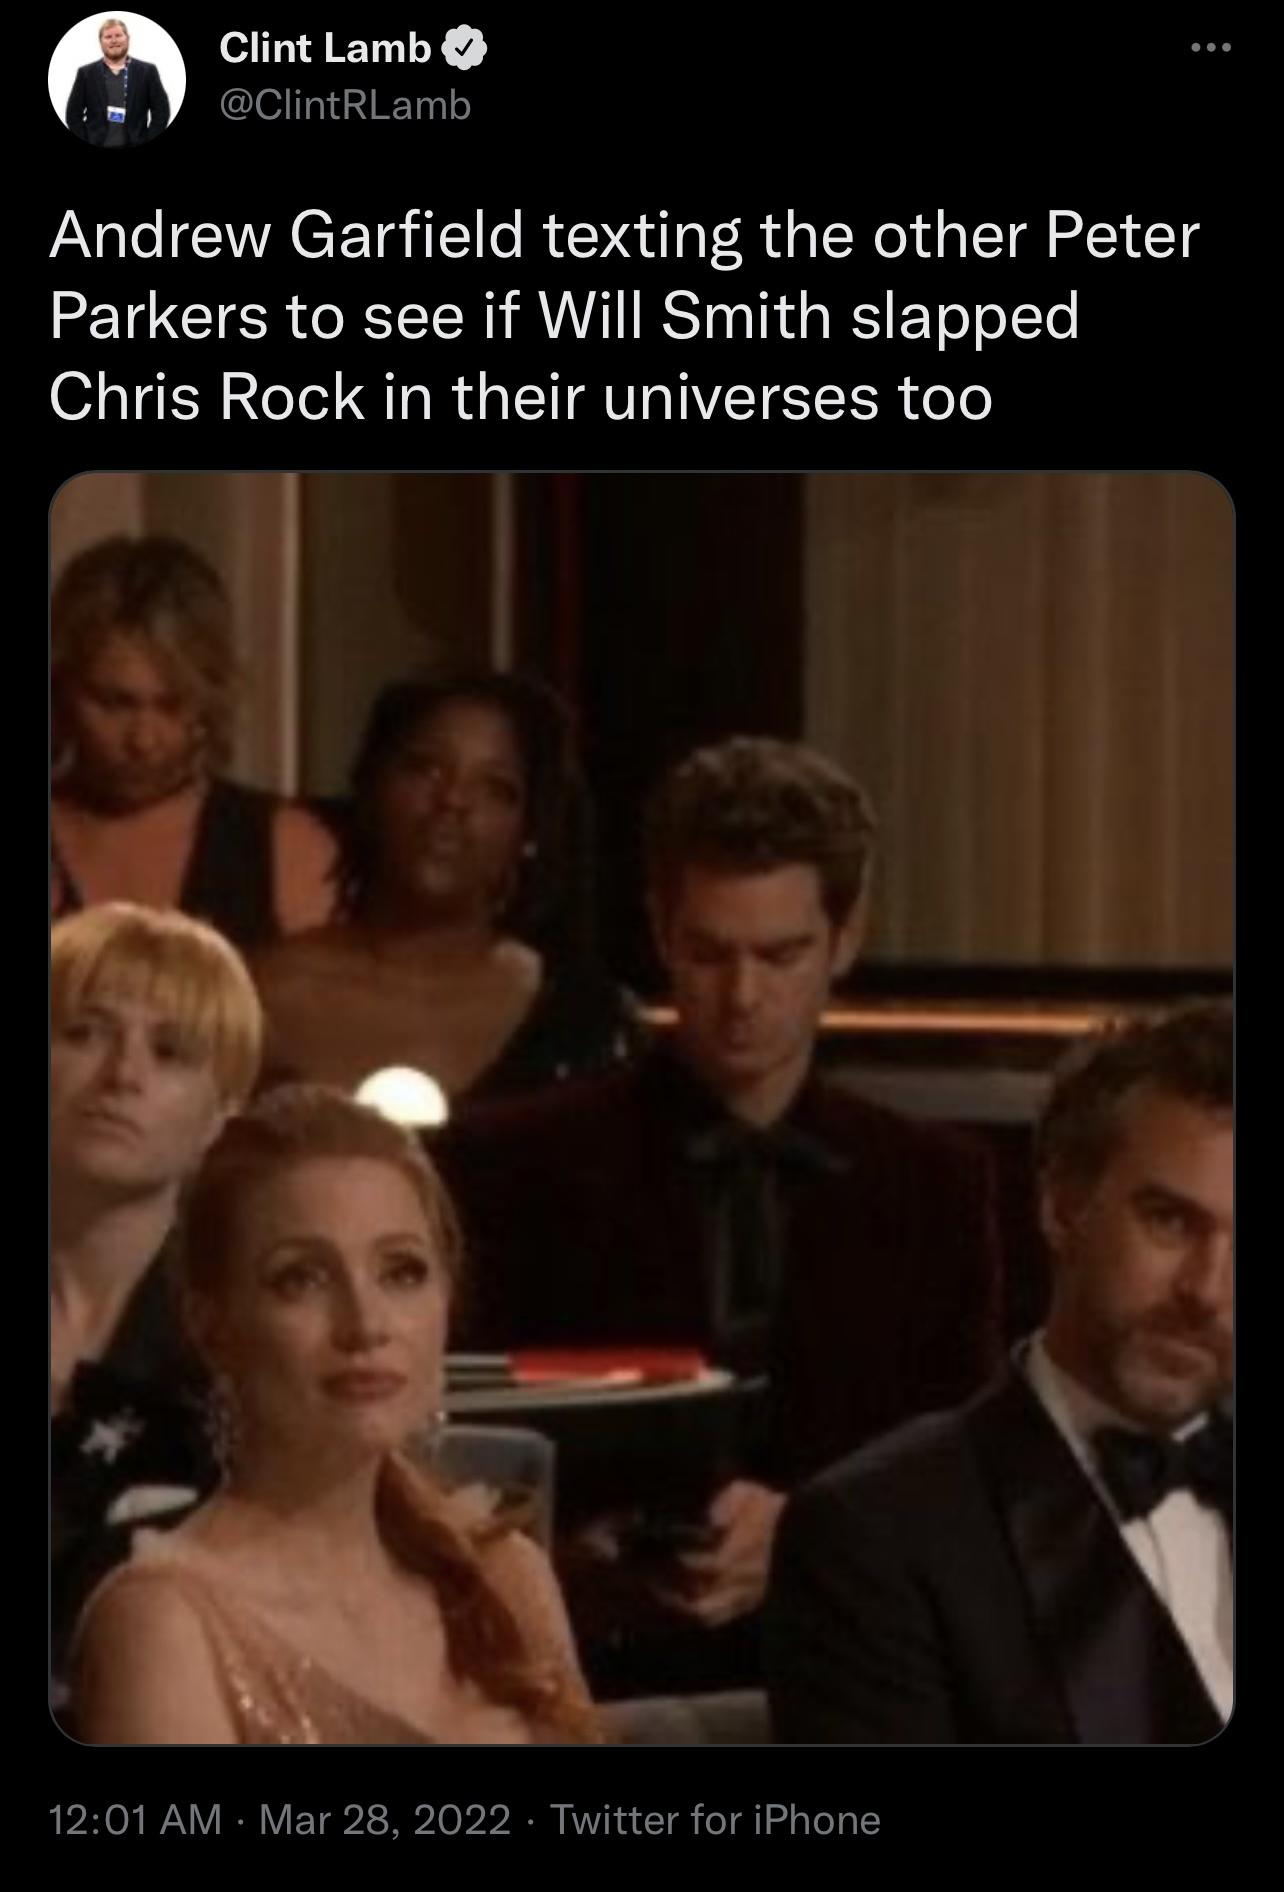 andrew garfield texting the other peter parkers - ... Clint Lamb Andrew Garfield texting the other Peter Parkers to see if Will Smith slapped Chris Rock in their universes too . Twitter for iPhone